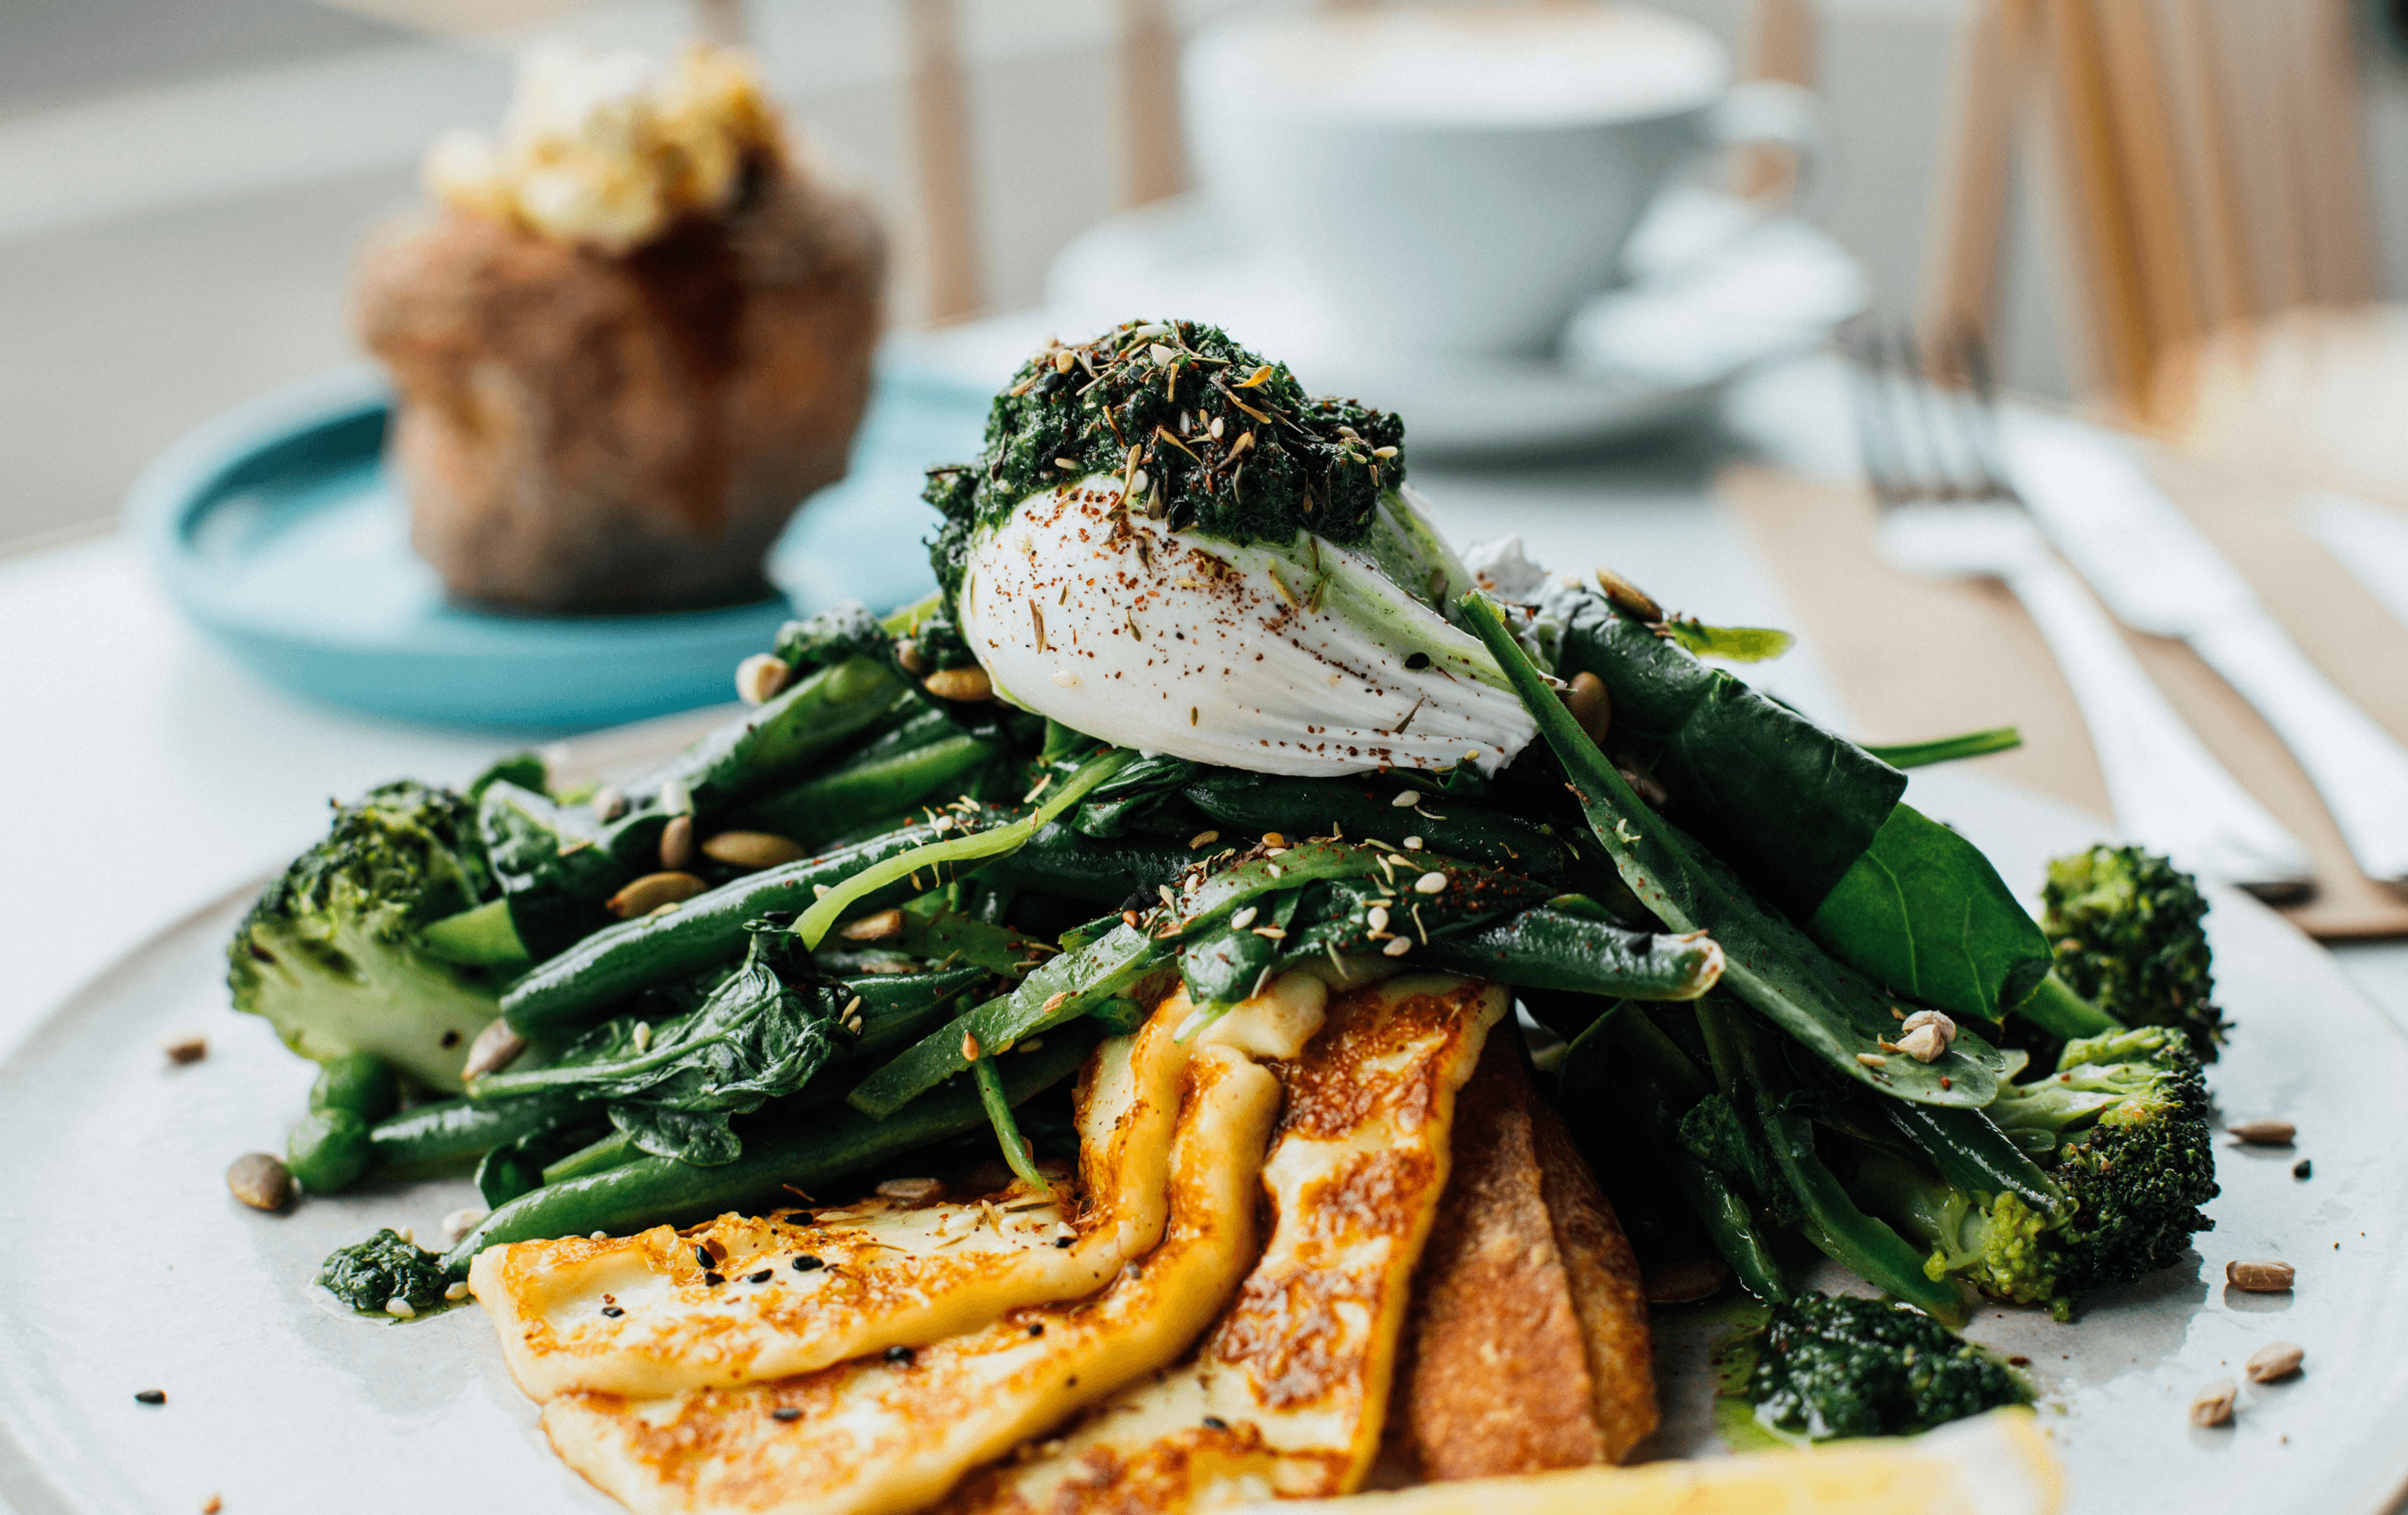 Hampton's poached egg over sauteed greens, one of the best breakfasts in Melbourne